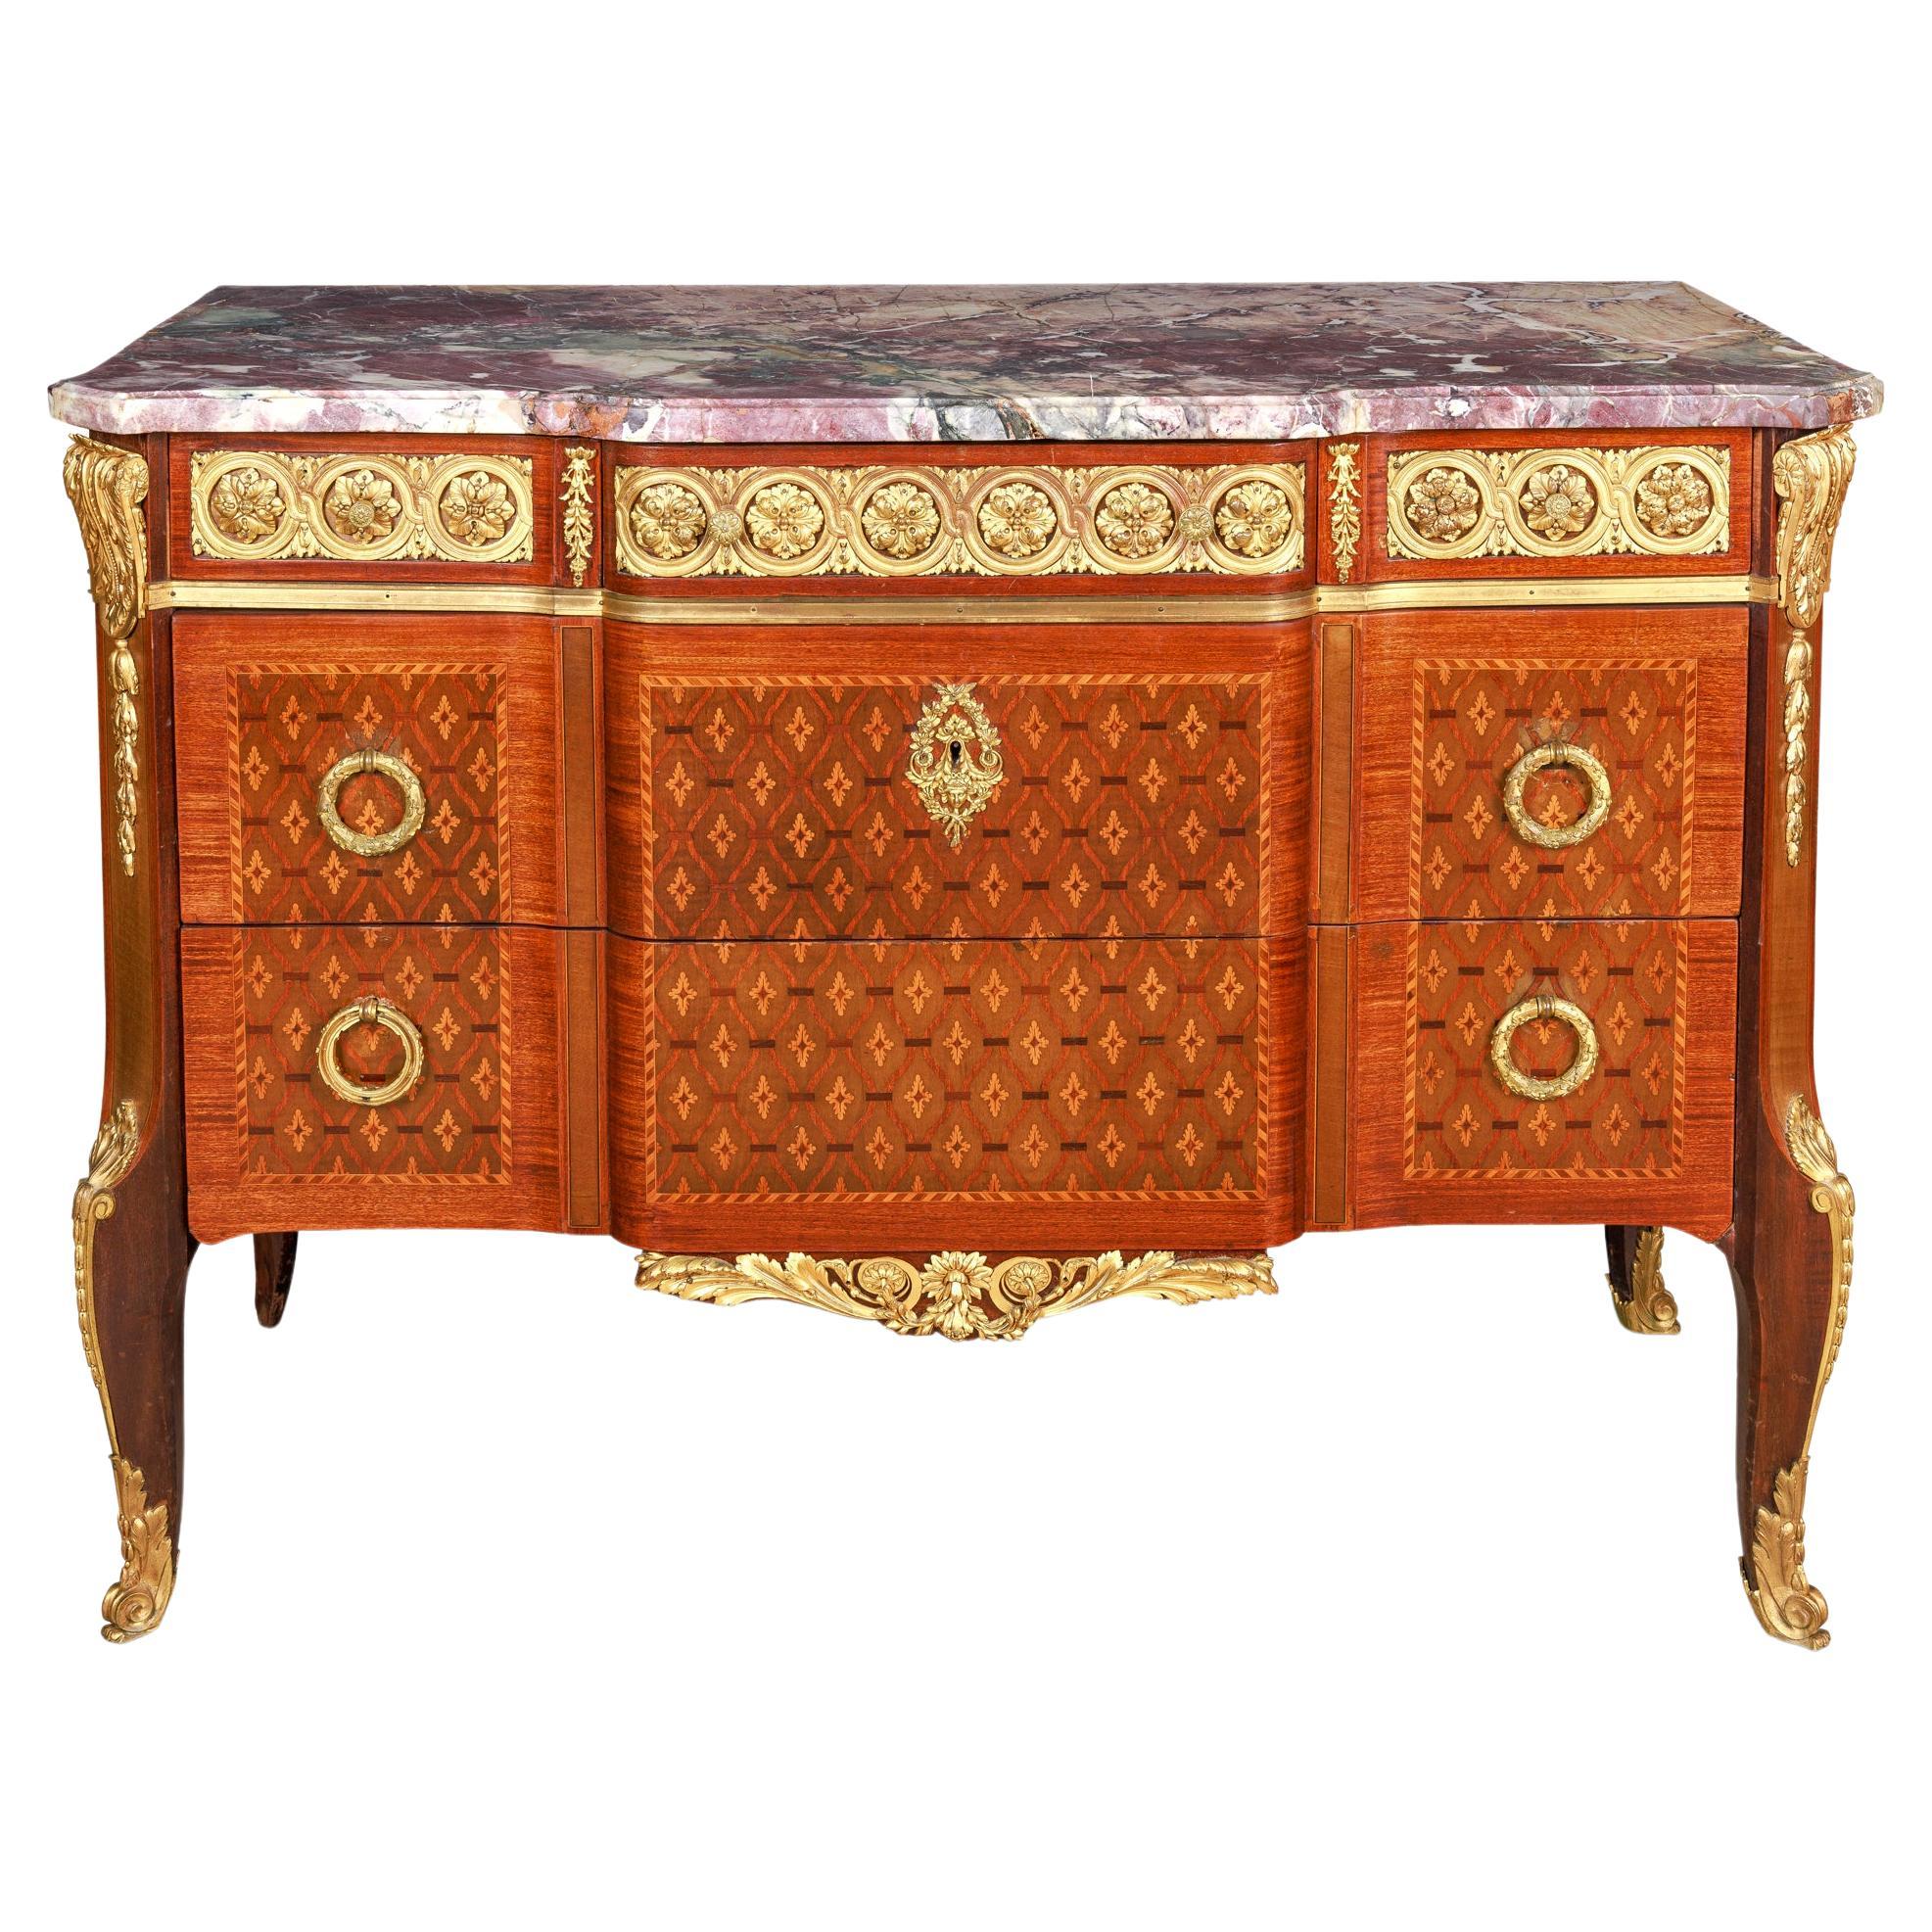 French Louis XVI Style Ormolu-Mounted Marquetry and Parquetry Commode